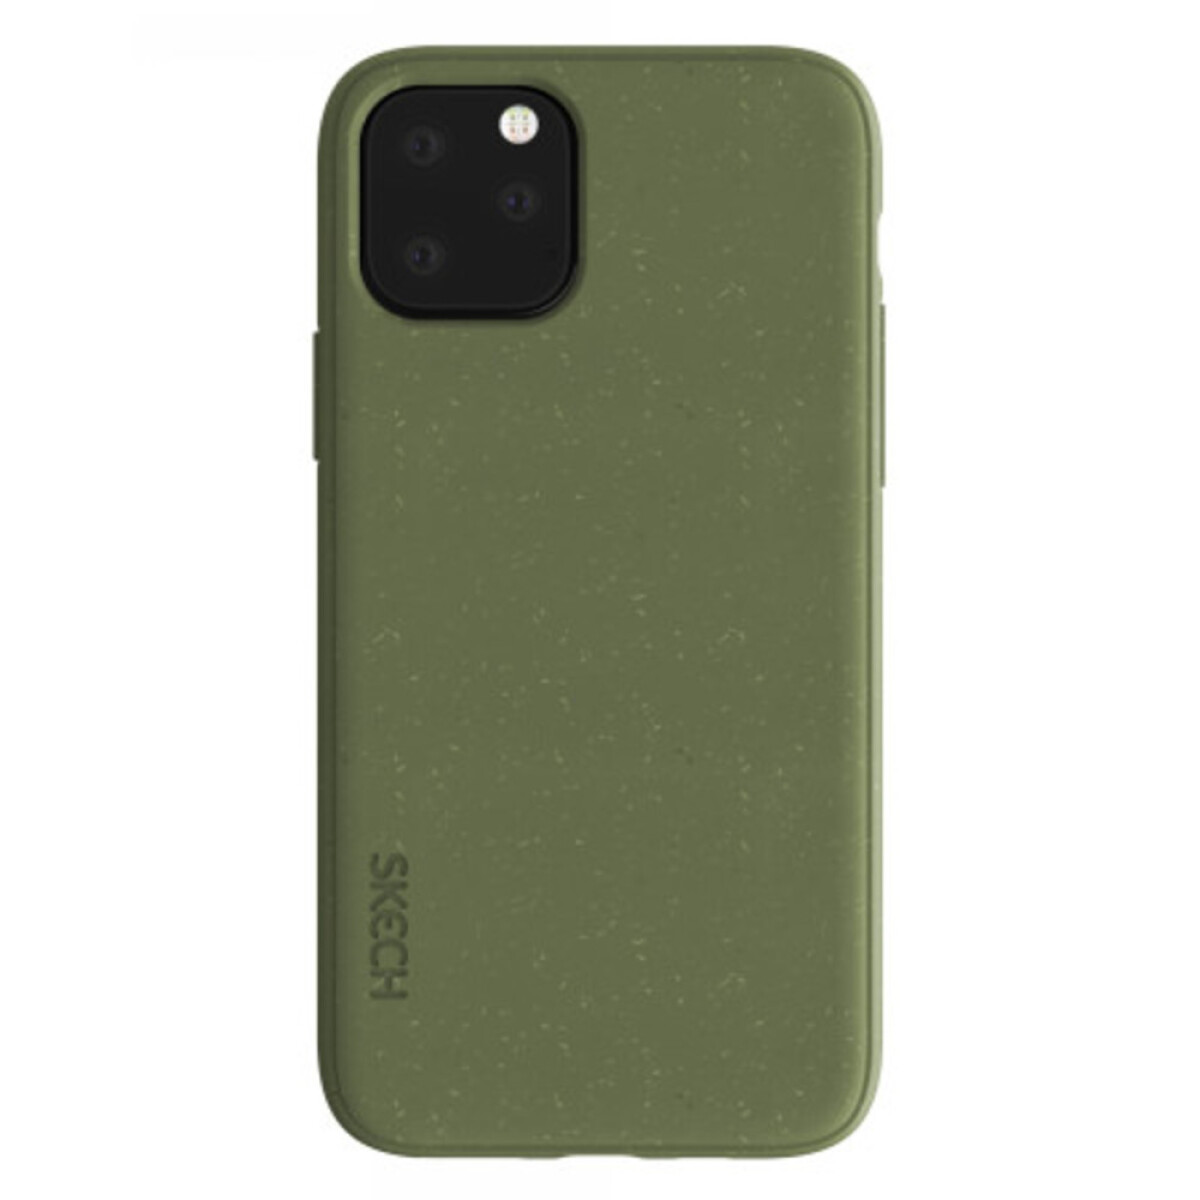 Max BioCase SKECH Olive Bookcover, olive, iPhone Pro Pro 11 Max, Apple, iPhone 11